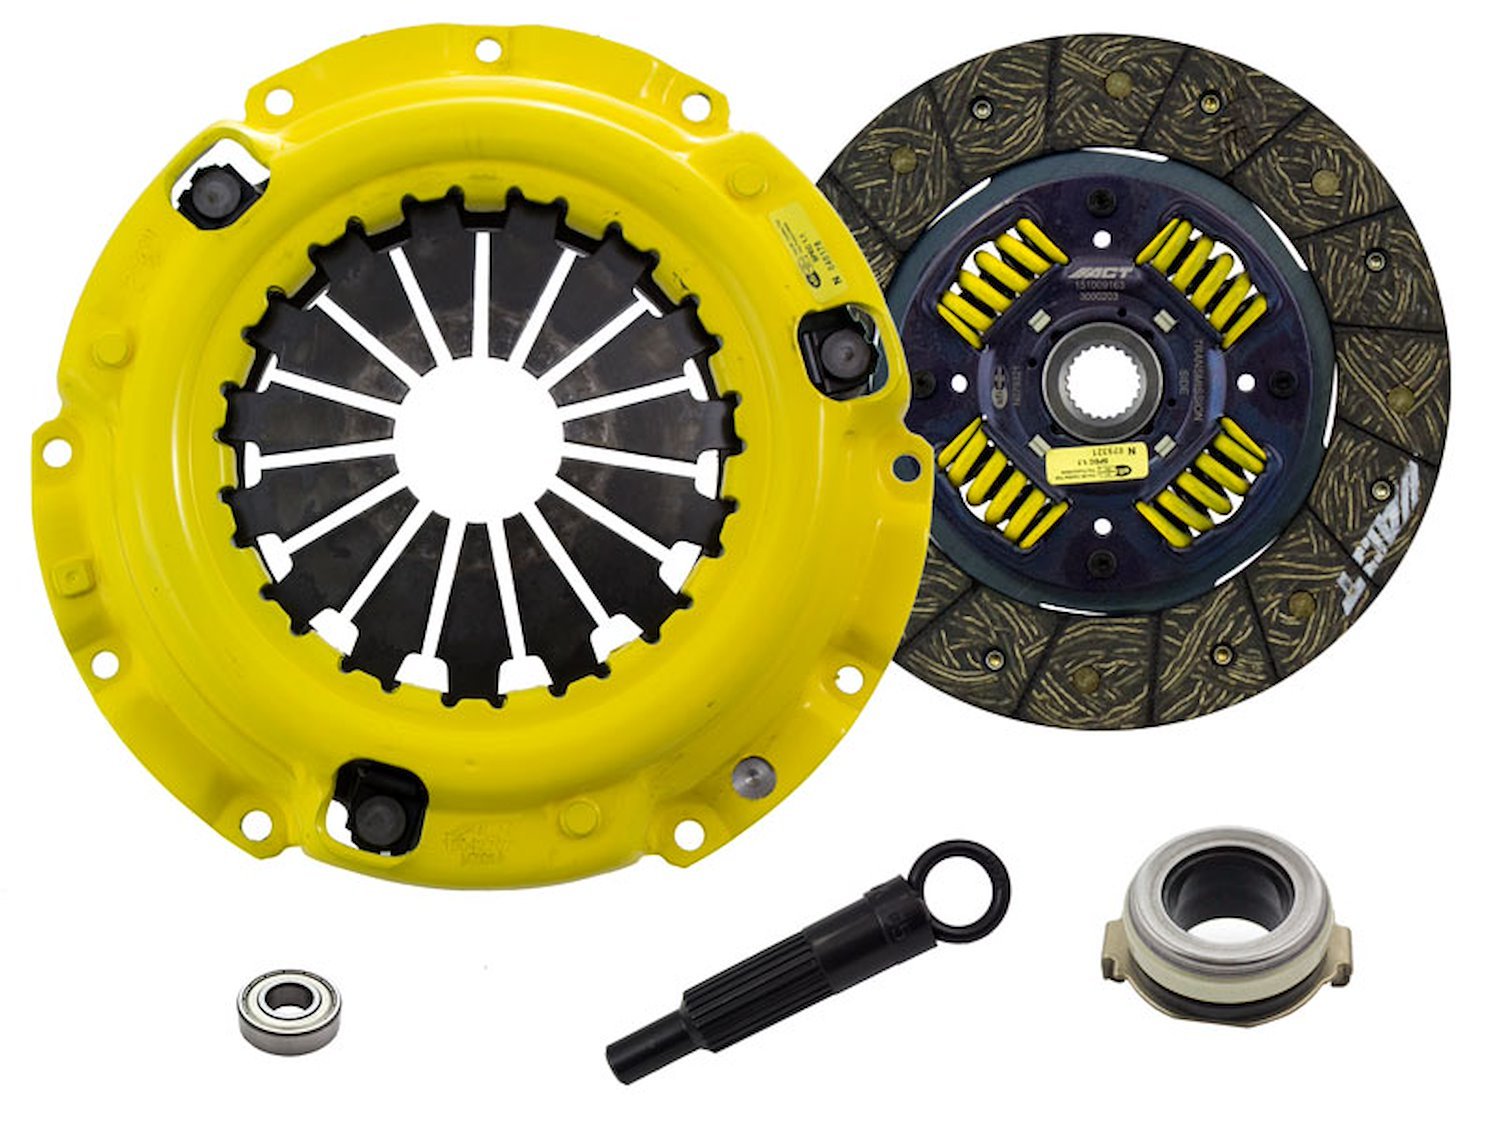 HD/Performance Street Sprung Transmission Clutch Kit Fits Select